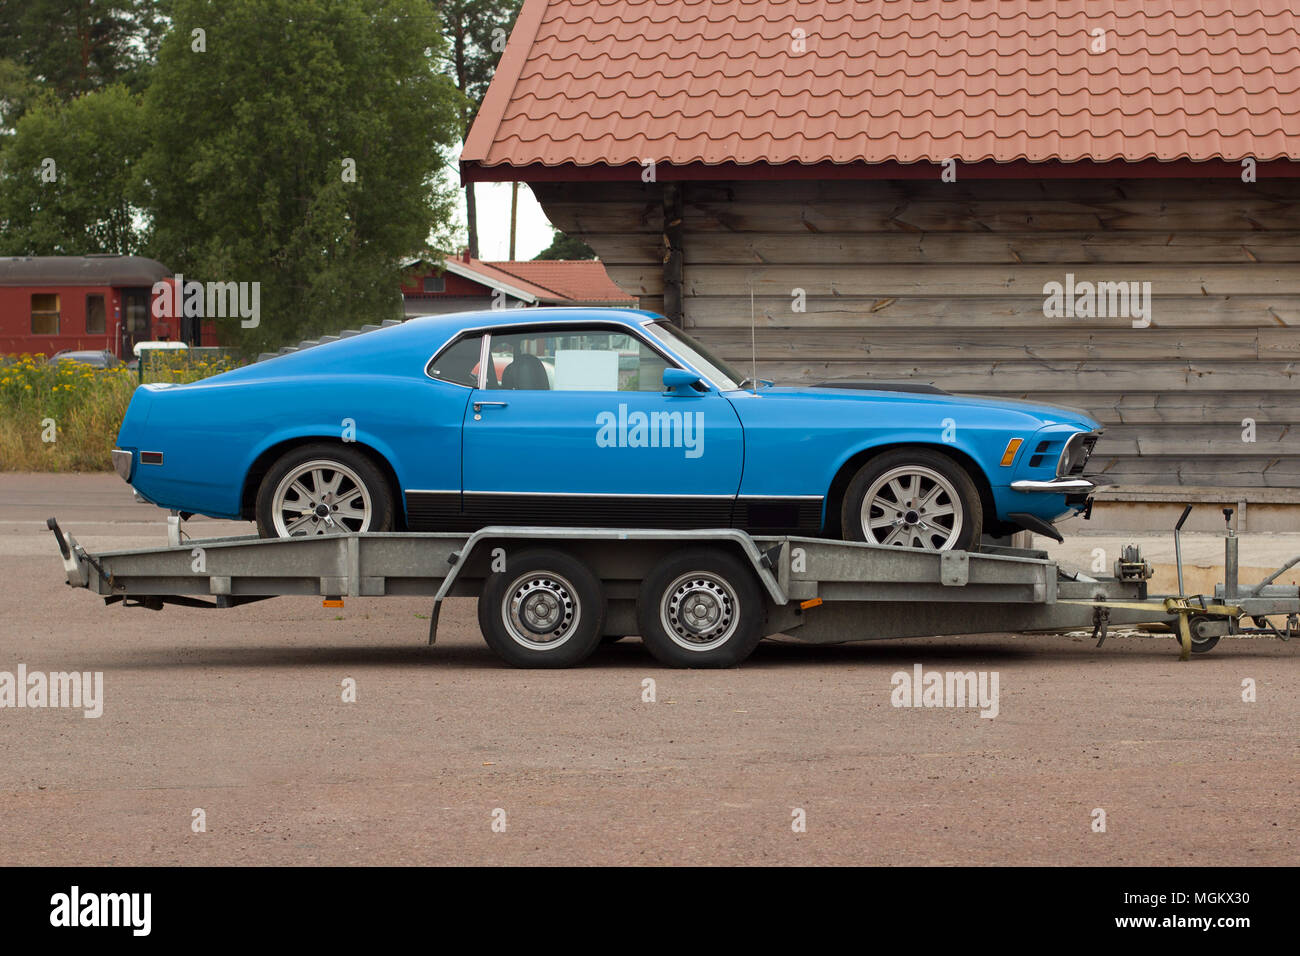 Truck in old car assistance. Car on a flatbed truck. Car carrier trailer. Stock Photo